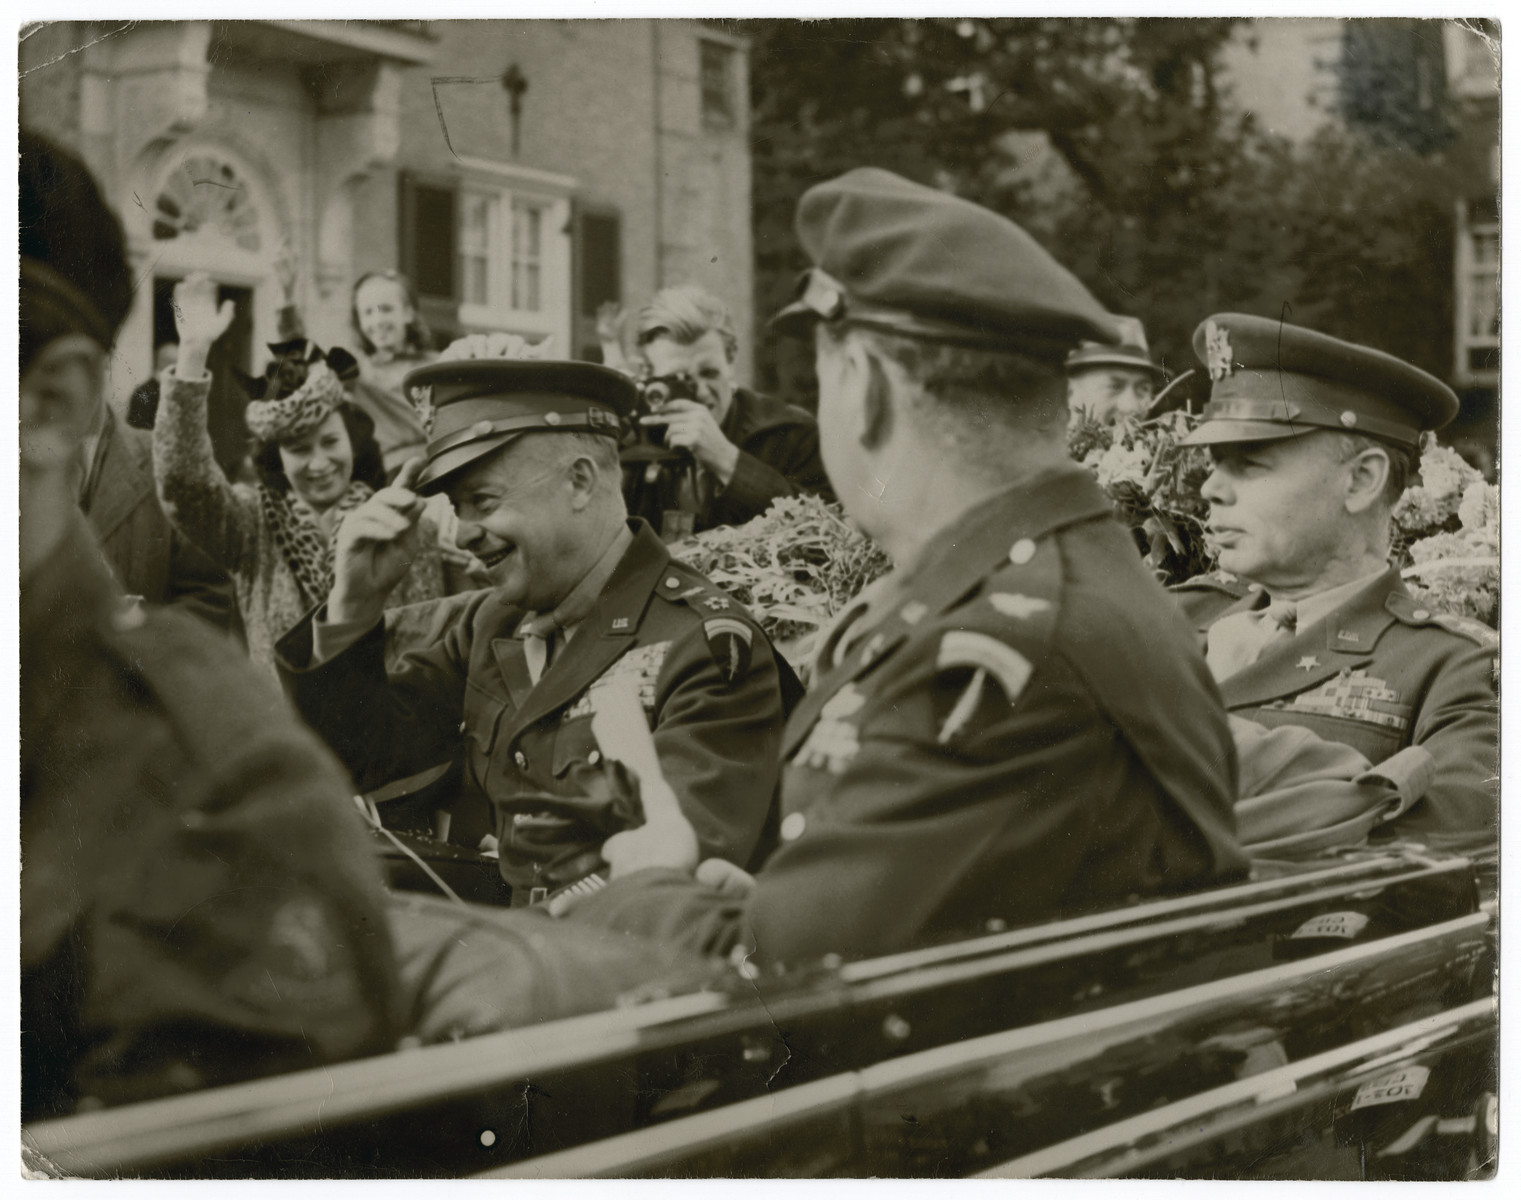 Gen. Eisenhower pays an official visit to The Netherlands after liberation.

Original caption reads:  General Eisenhower's visit to The Netherlands.  General Eisenhower leaving U.S. Ambassador Hornbeck's residence at the Hague.  In car Ike, Col. Griffith (with back to camera) and Lt. Gen. W.B.Smith.  (Girl waving immediately in front of General Eisenhower was girl who gave the General flowers and a kiss just before the General got in the car".